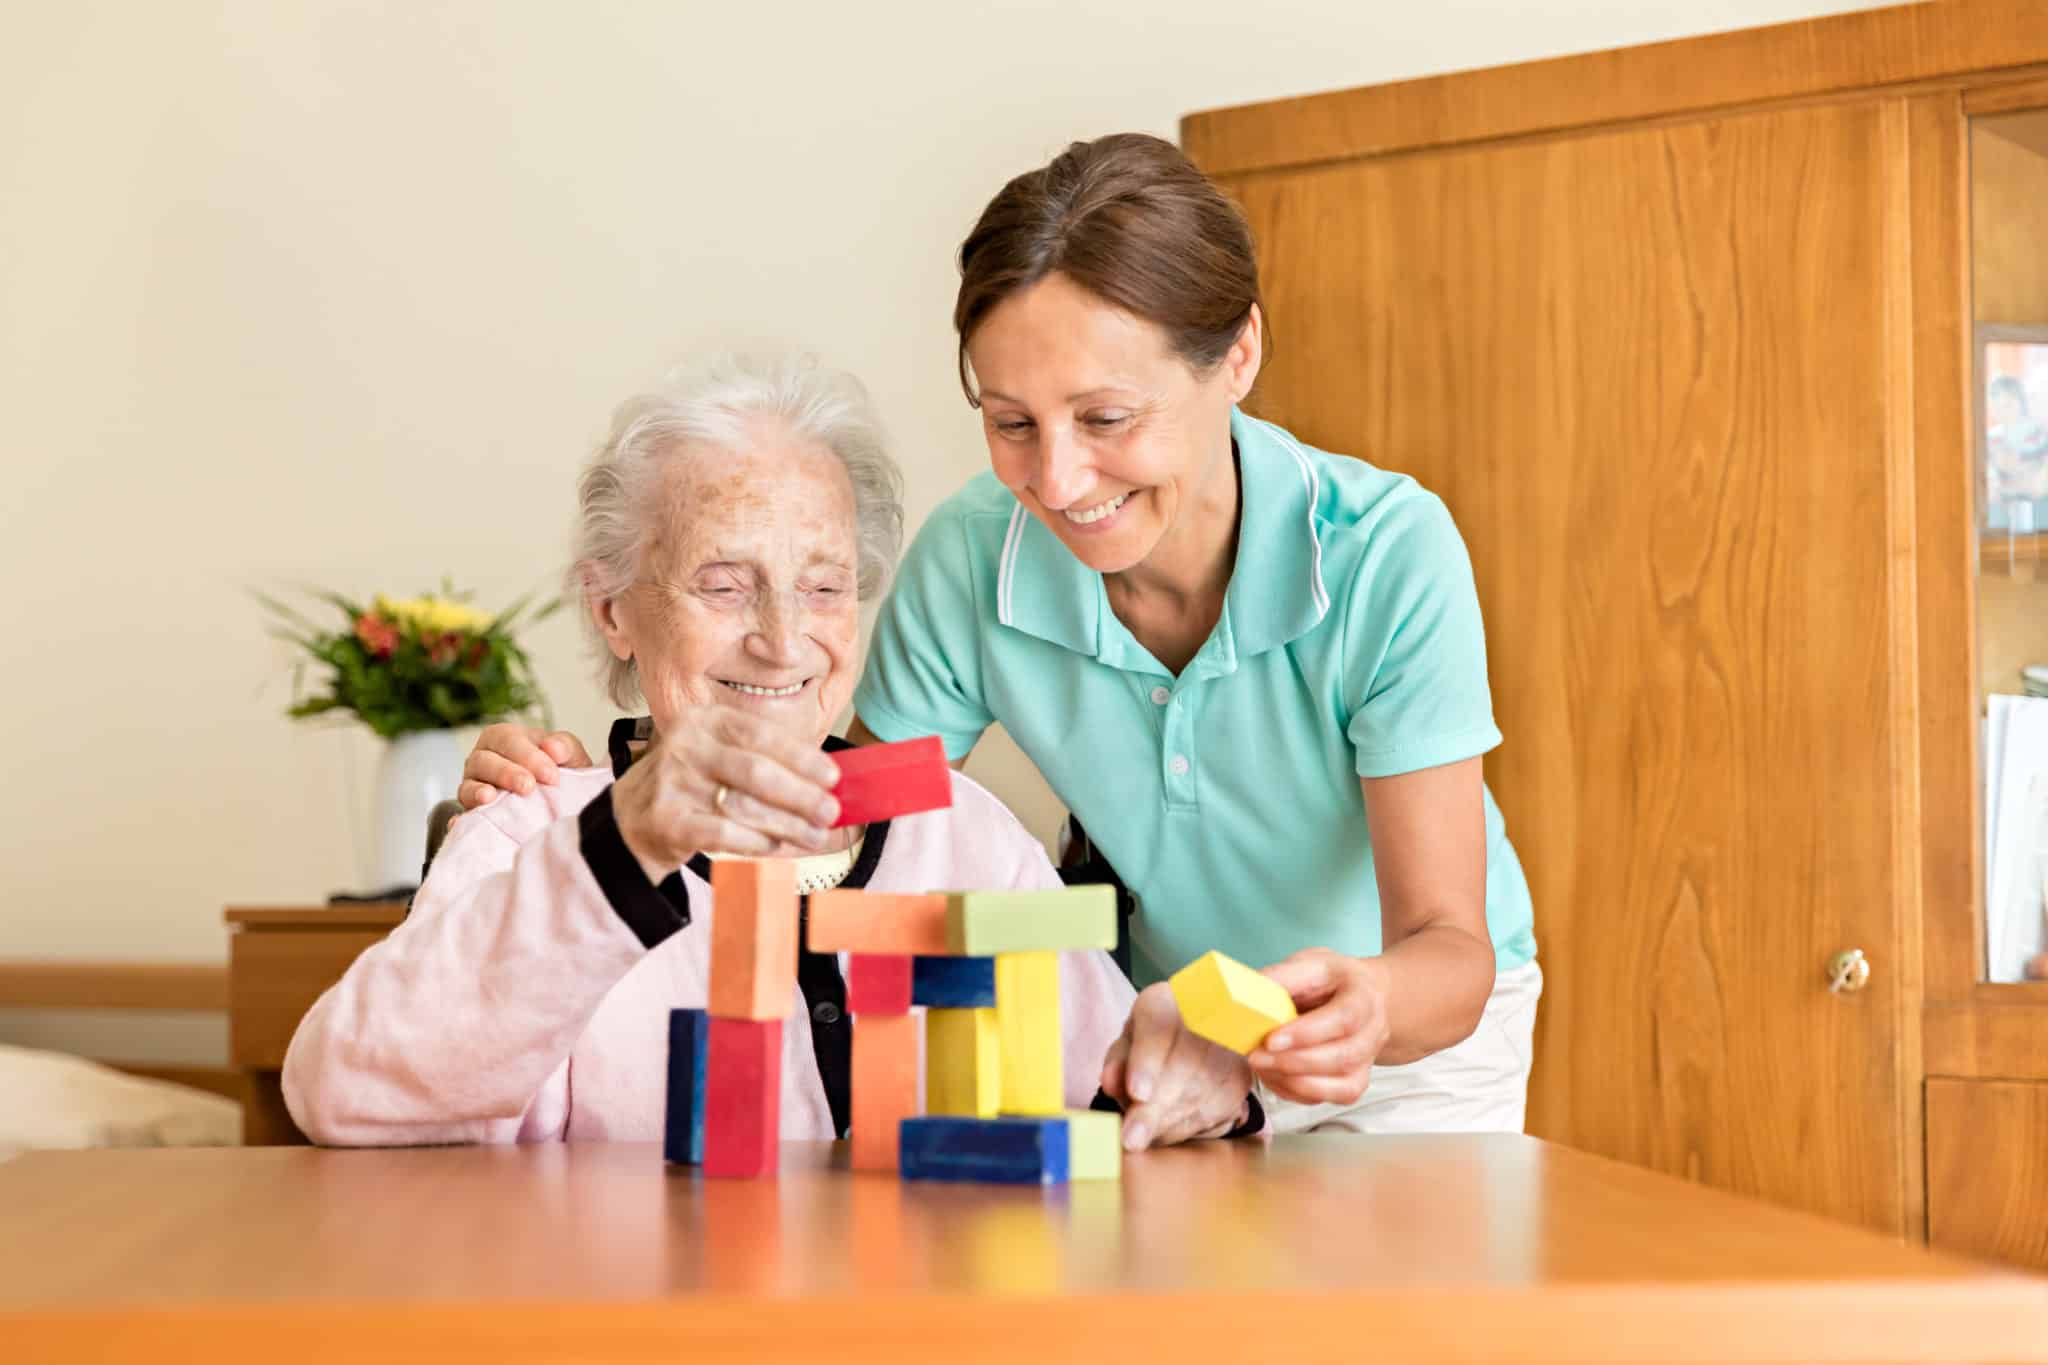 Dementia and Occupational Therapy - Home caregiver and senior adult woman playing with blocks